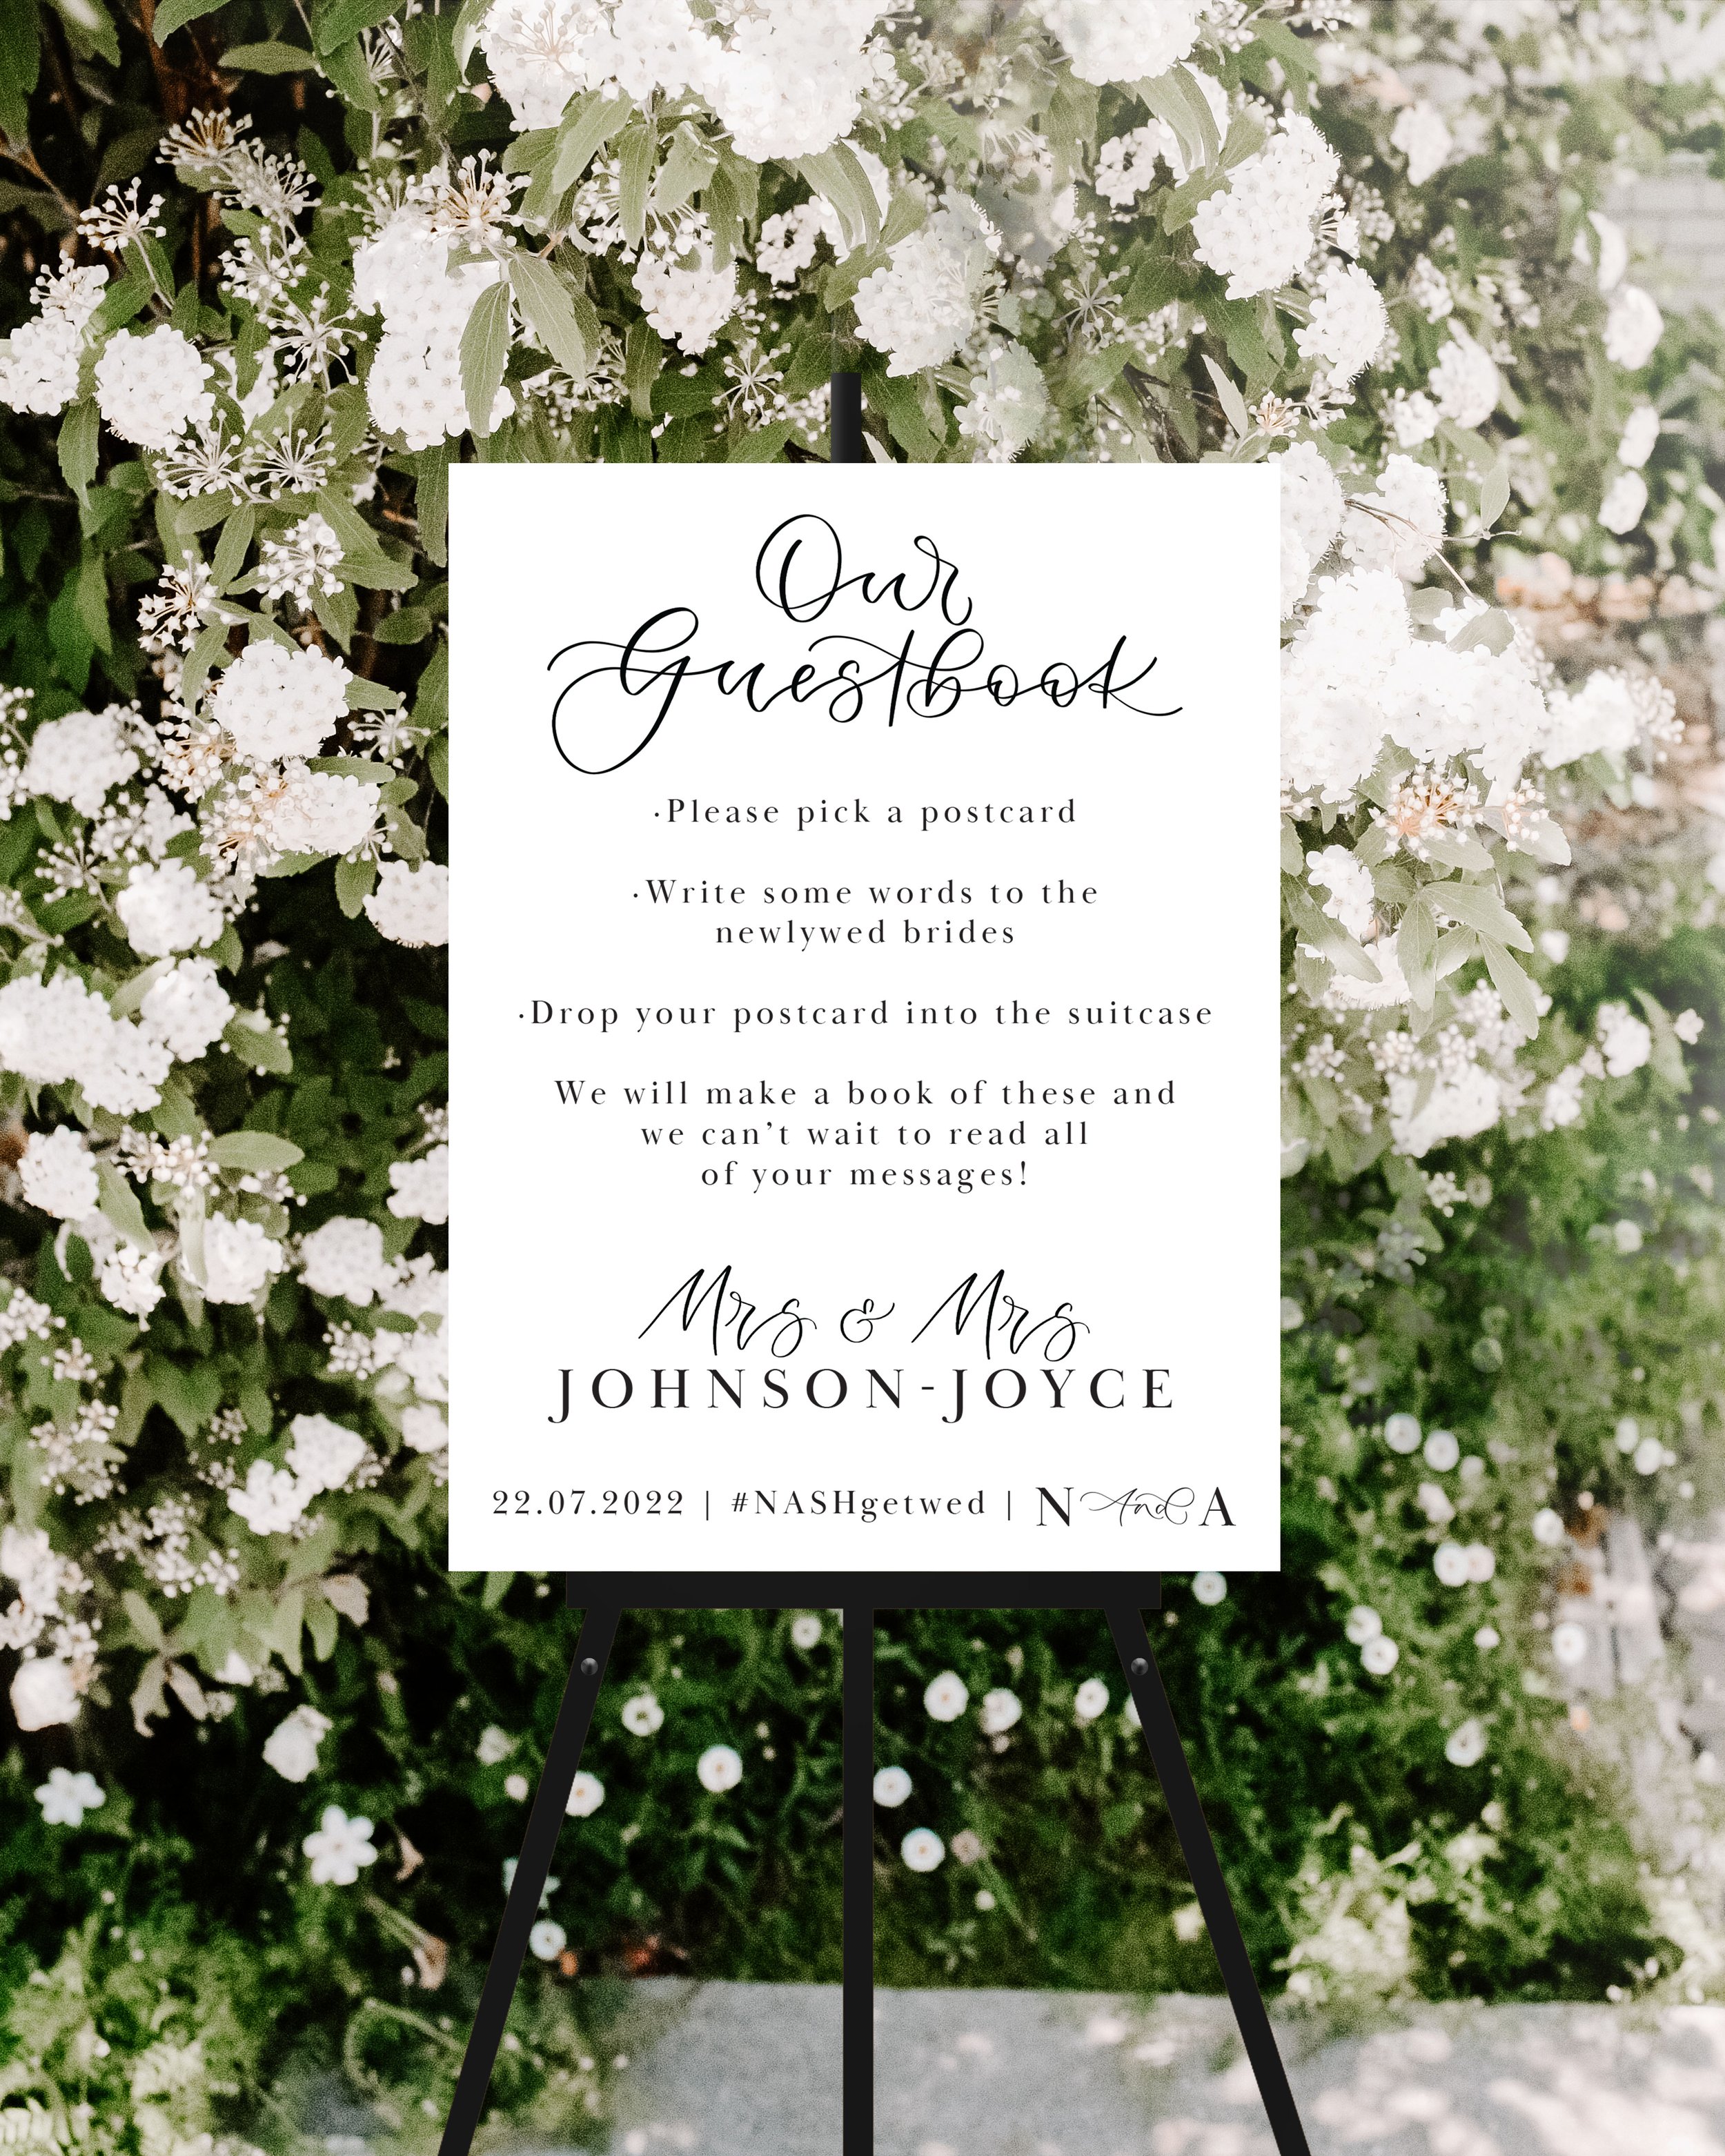 Minimalist calligraphy sign - monochrome wedding sign - guestbook sign from The Amyverse.jpg